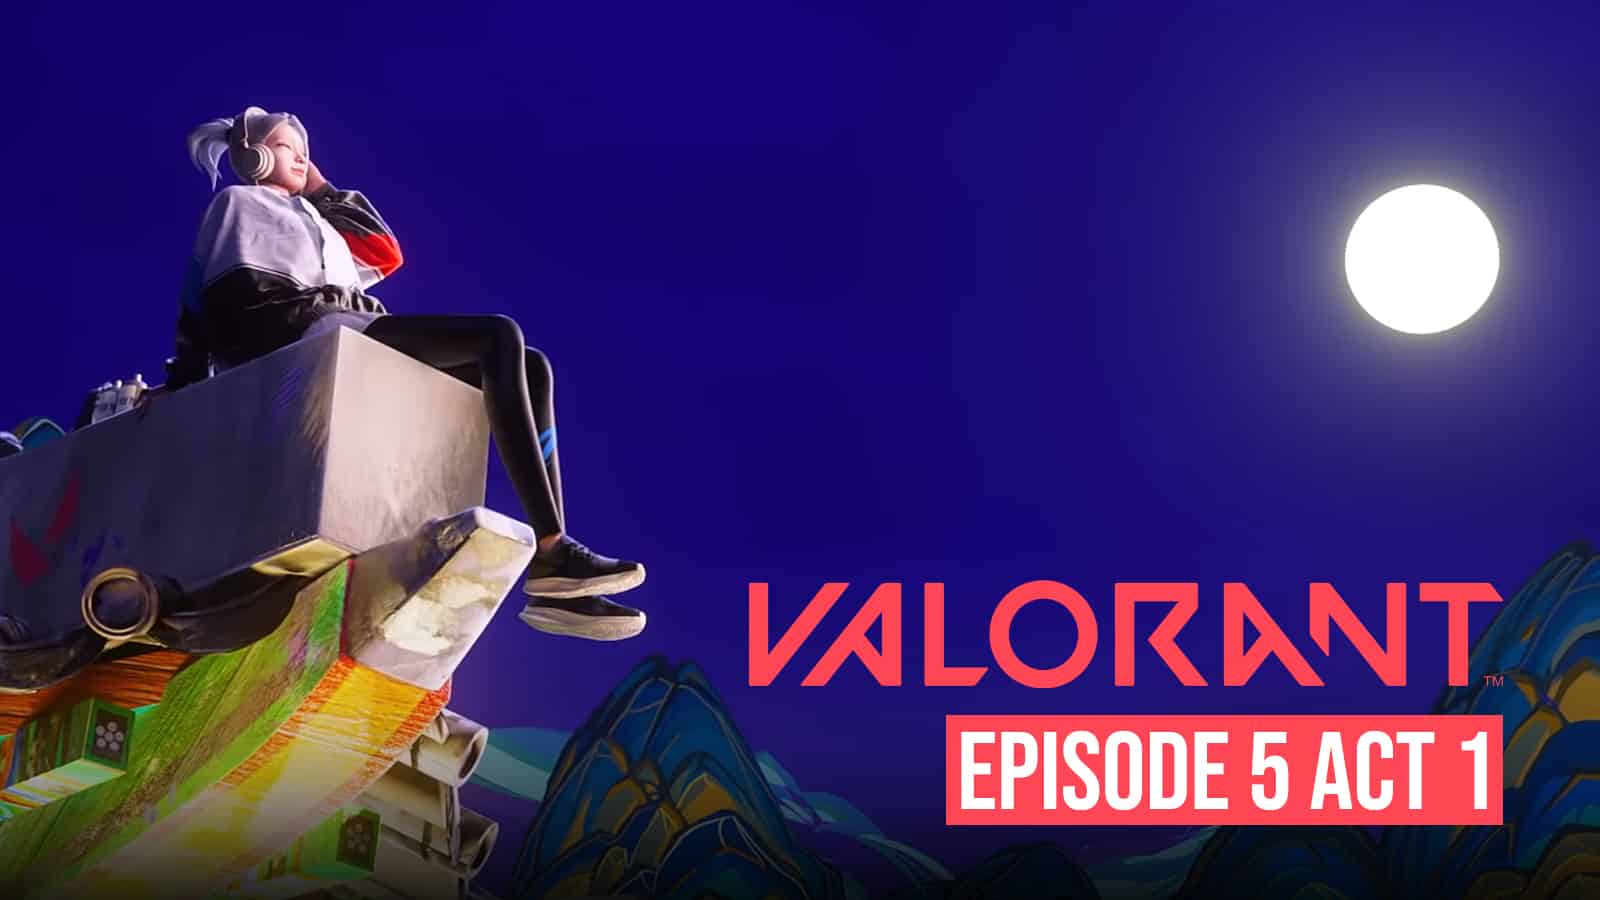 What is Valorant’s Episode 5 Ranked Distribution?